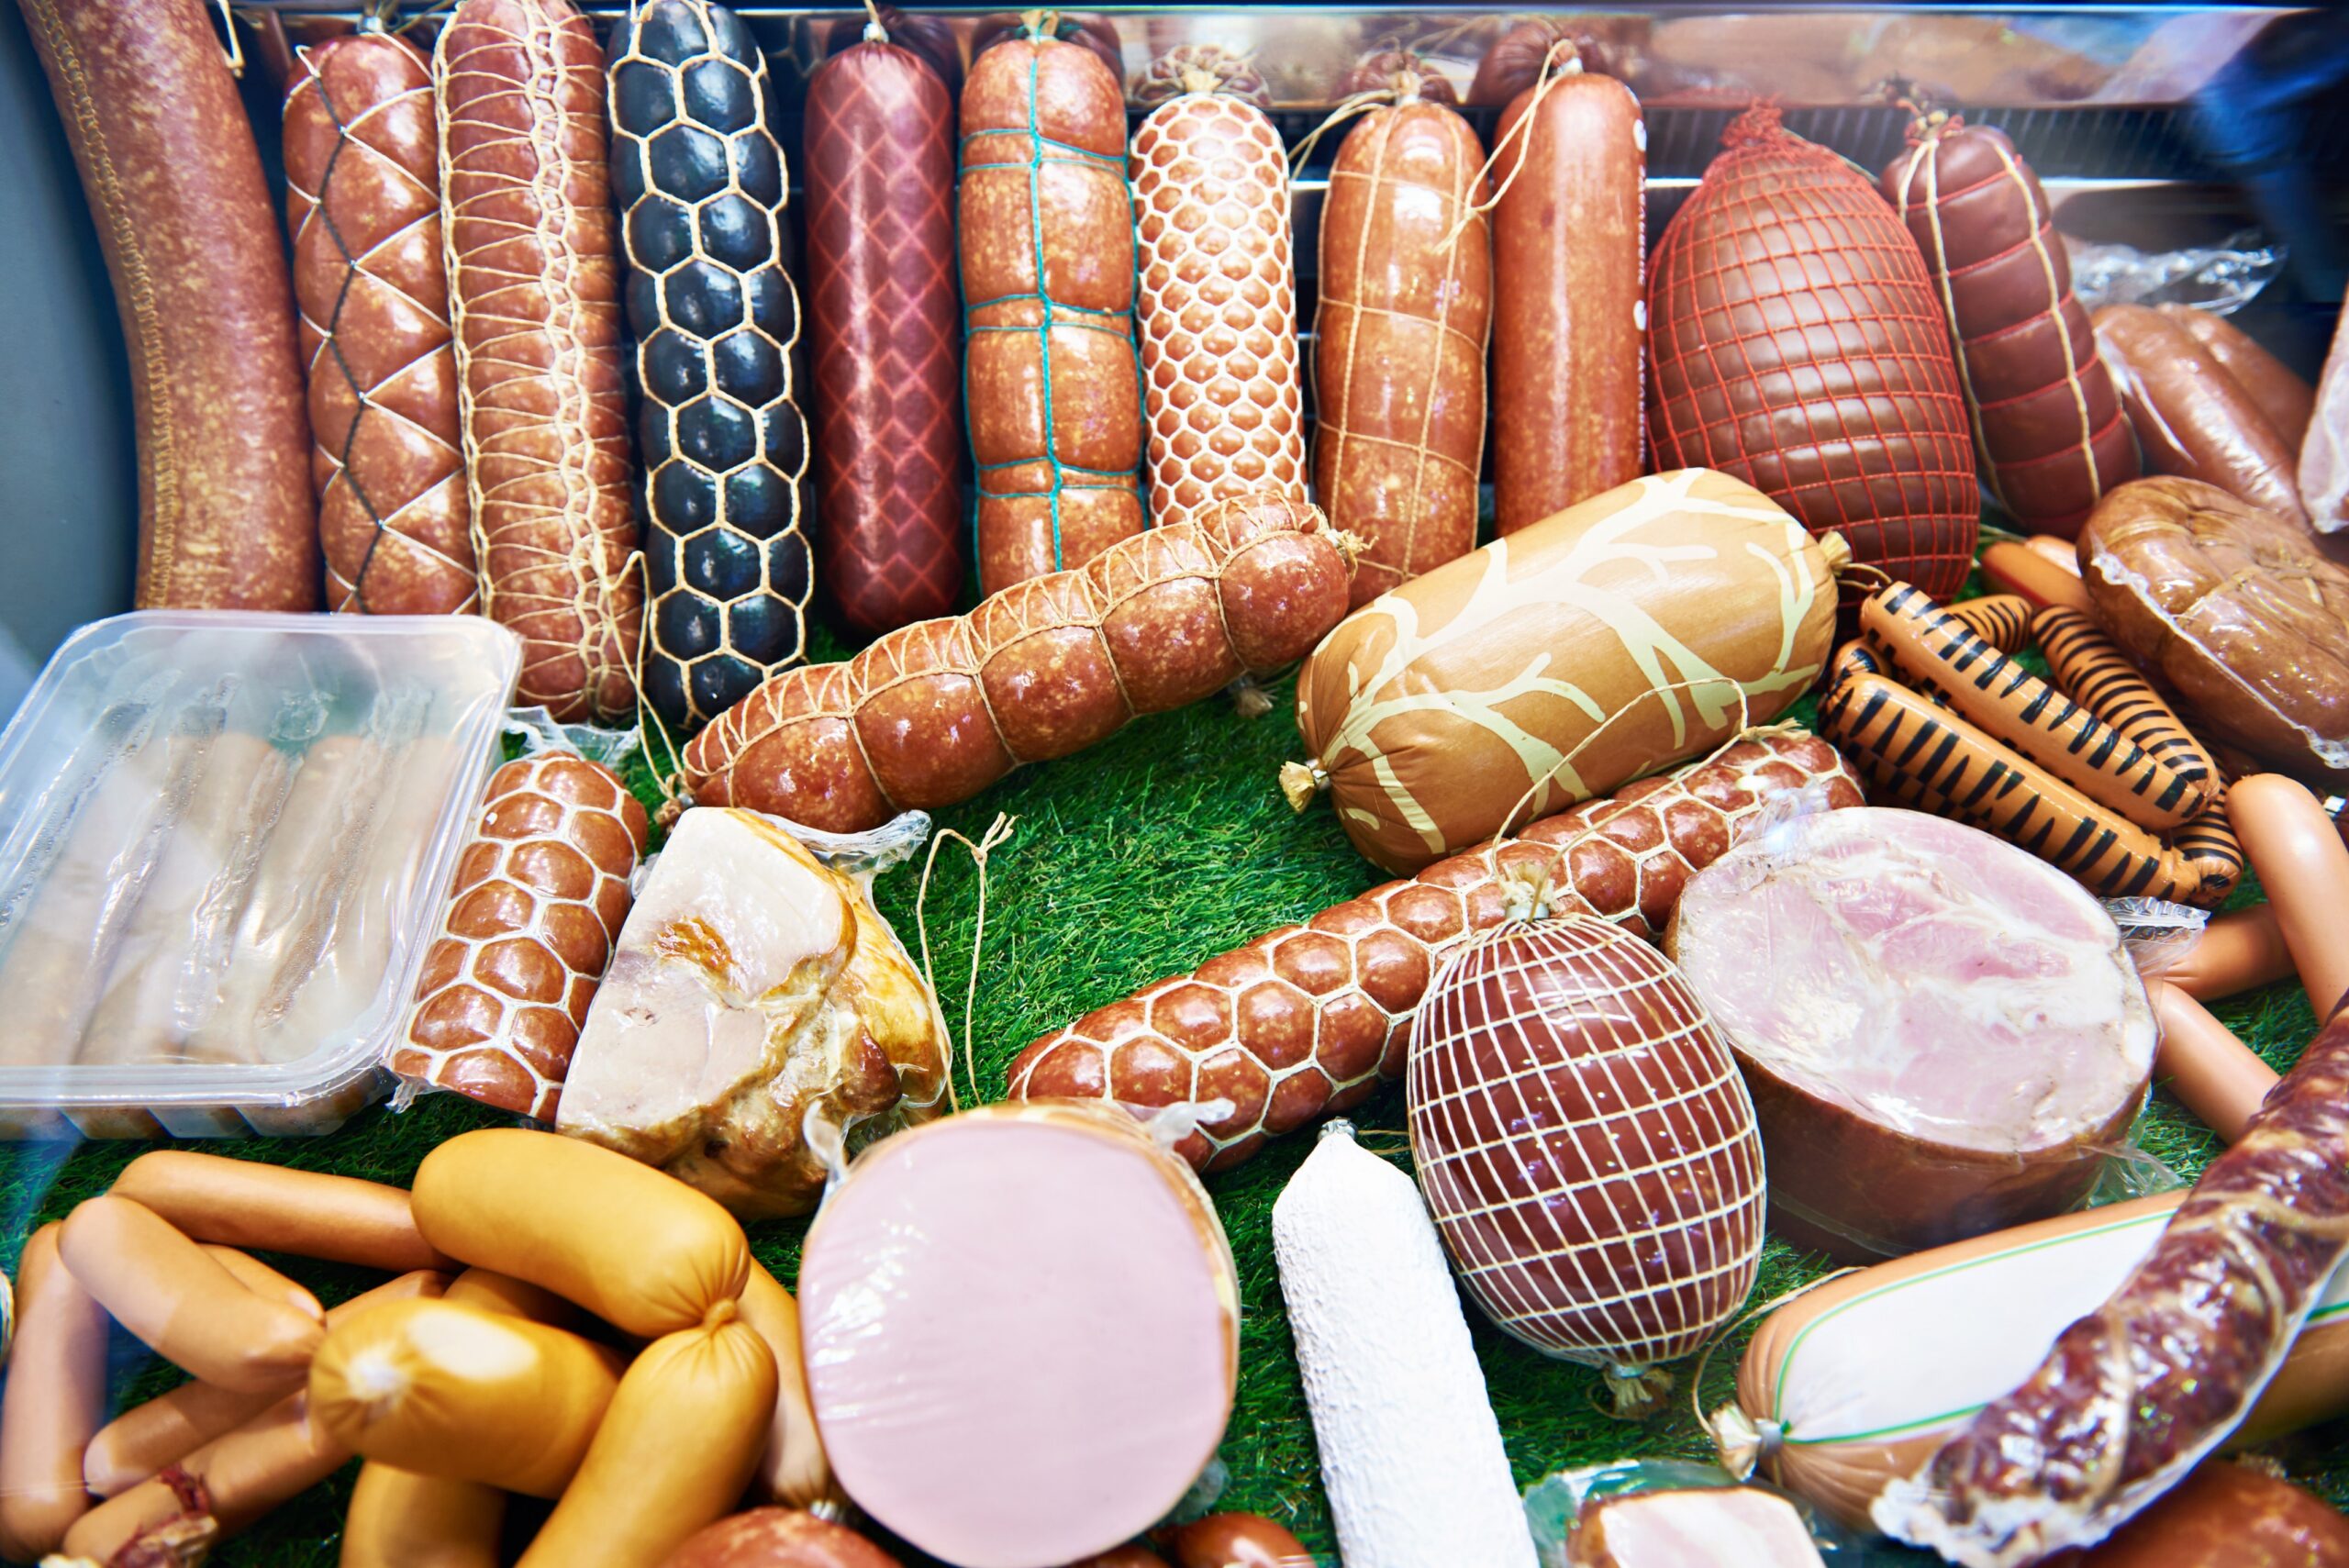 Eating Processed Meat Could Increase Dementia Risk